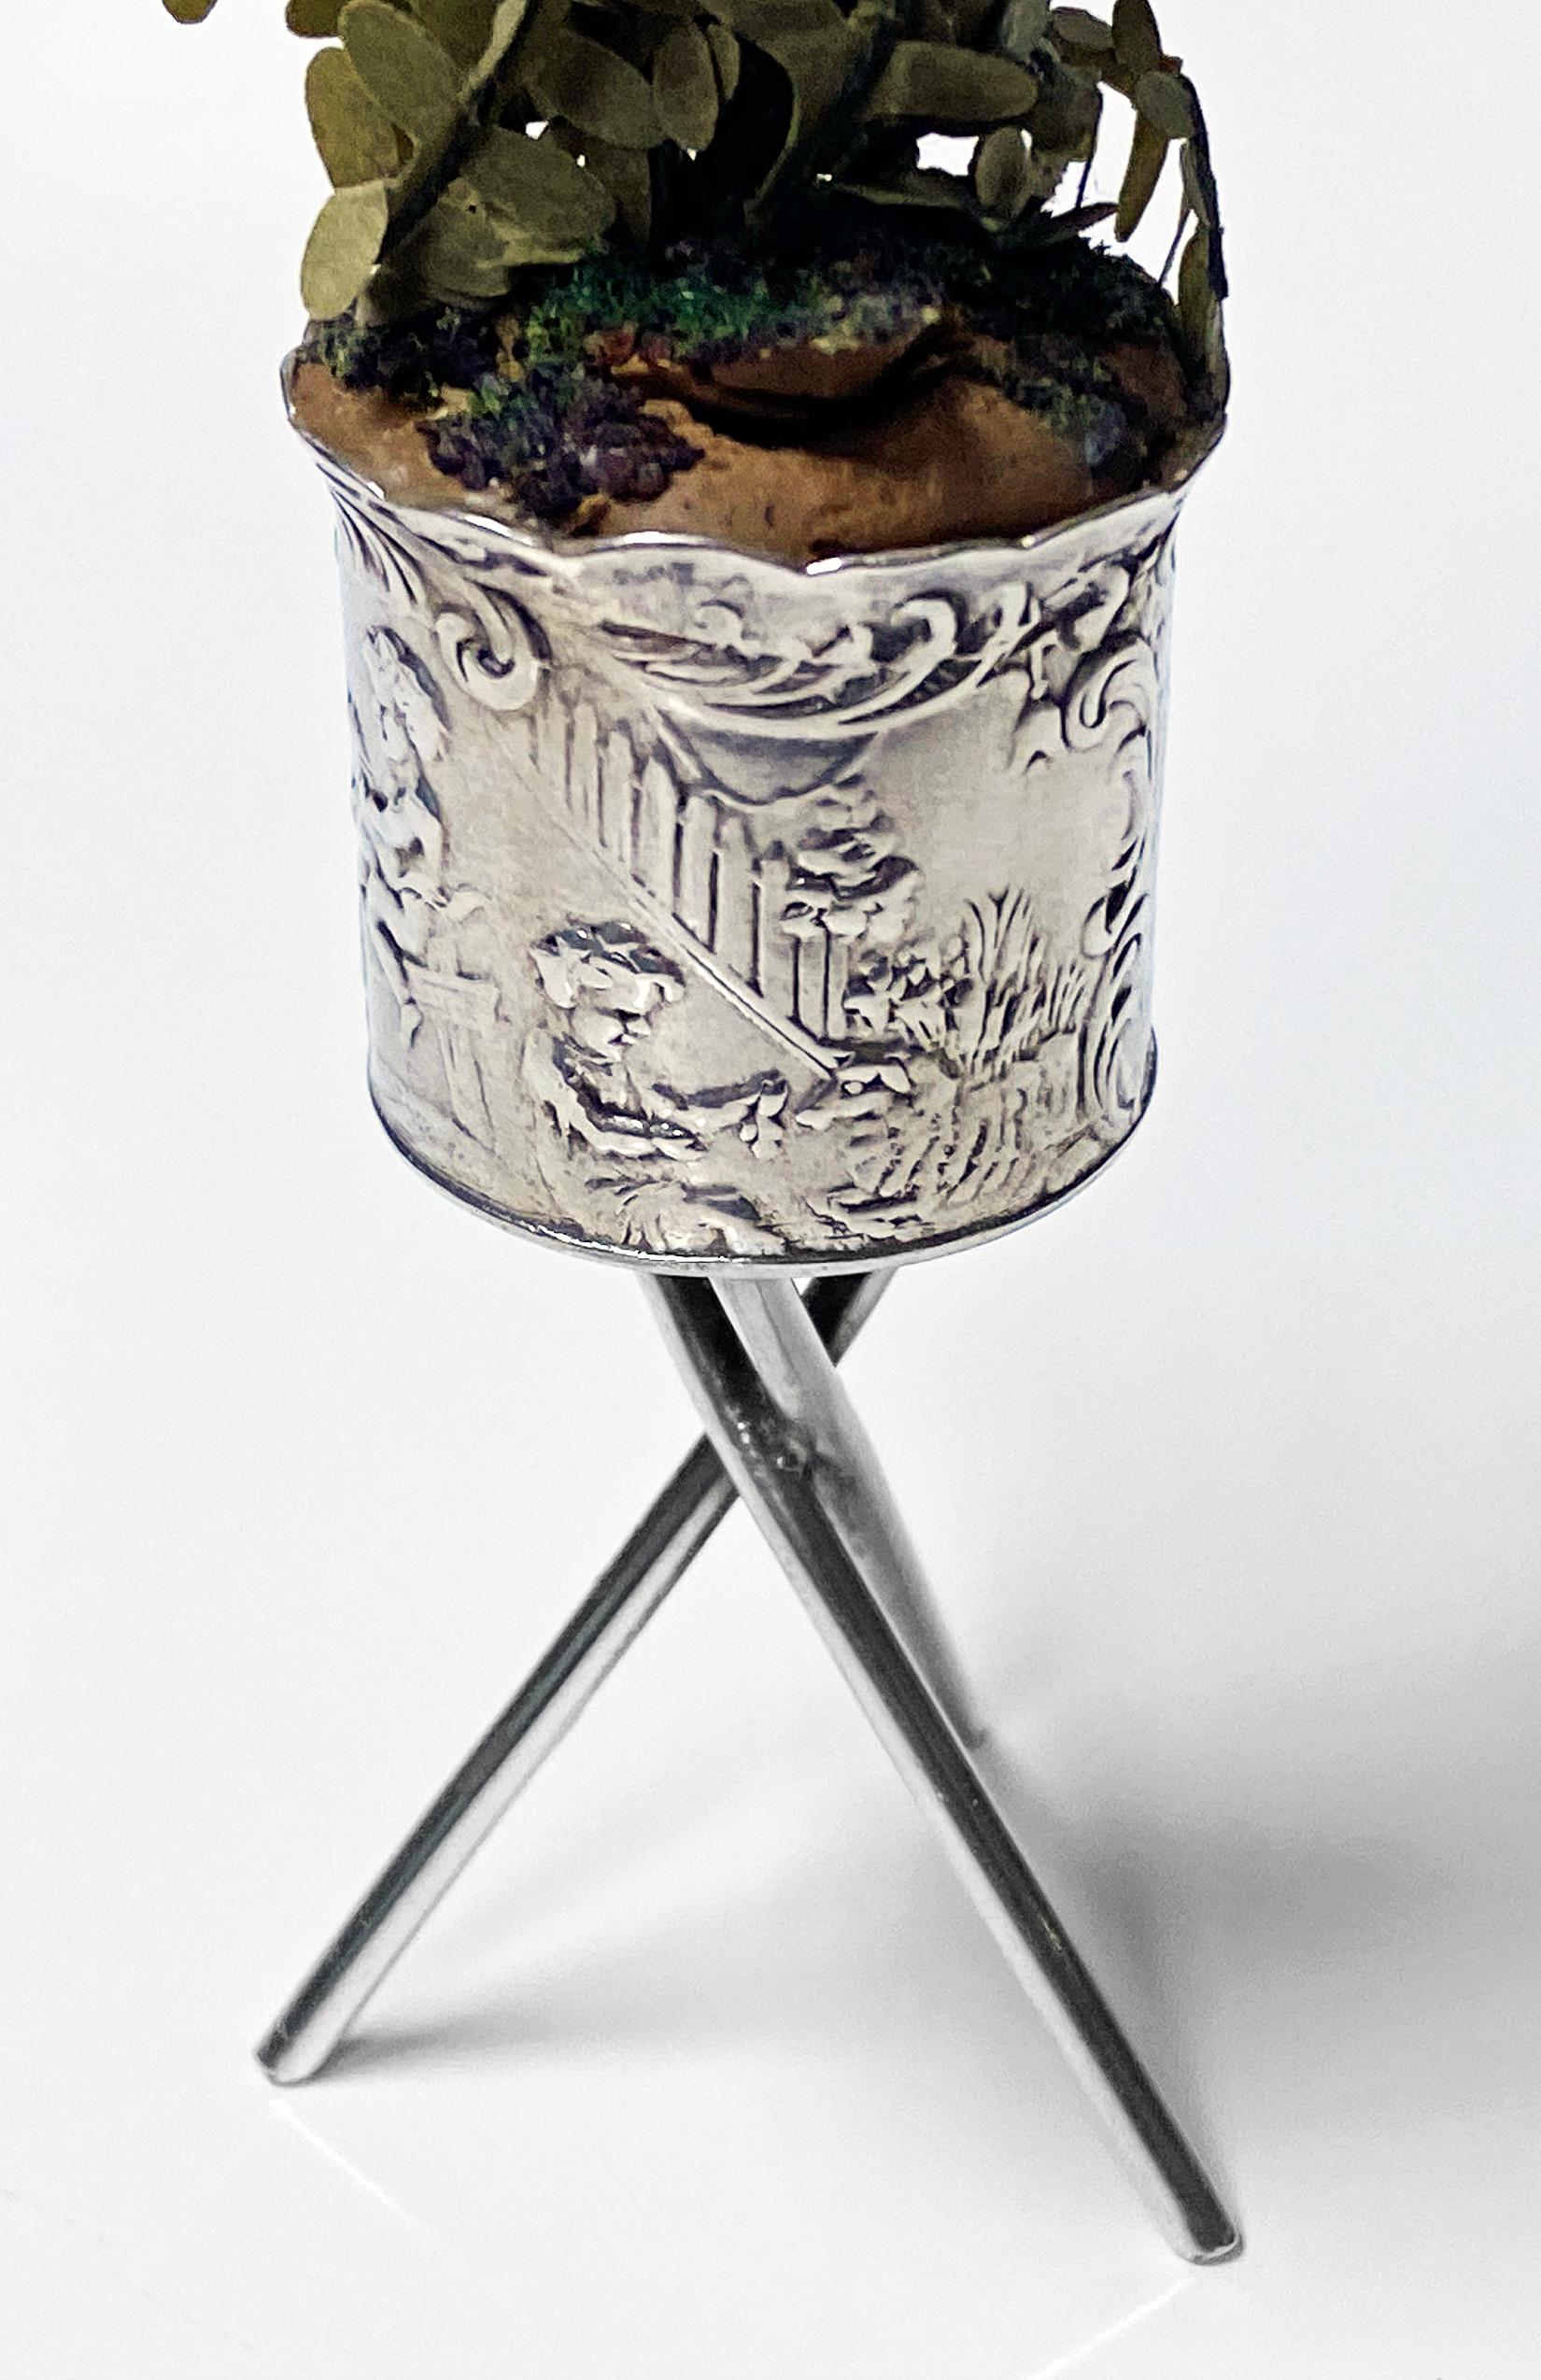 Antique silver miniature planter and stand, Germany, circa 1900. The planter with surround decoration depicting seated cherubs and figures amidst scenes with foxes, flying birds and dogs all on a crossed support stand. Pseudo German Hanau marks to